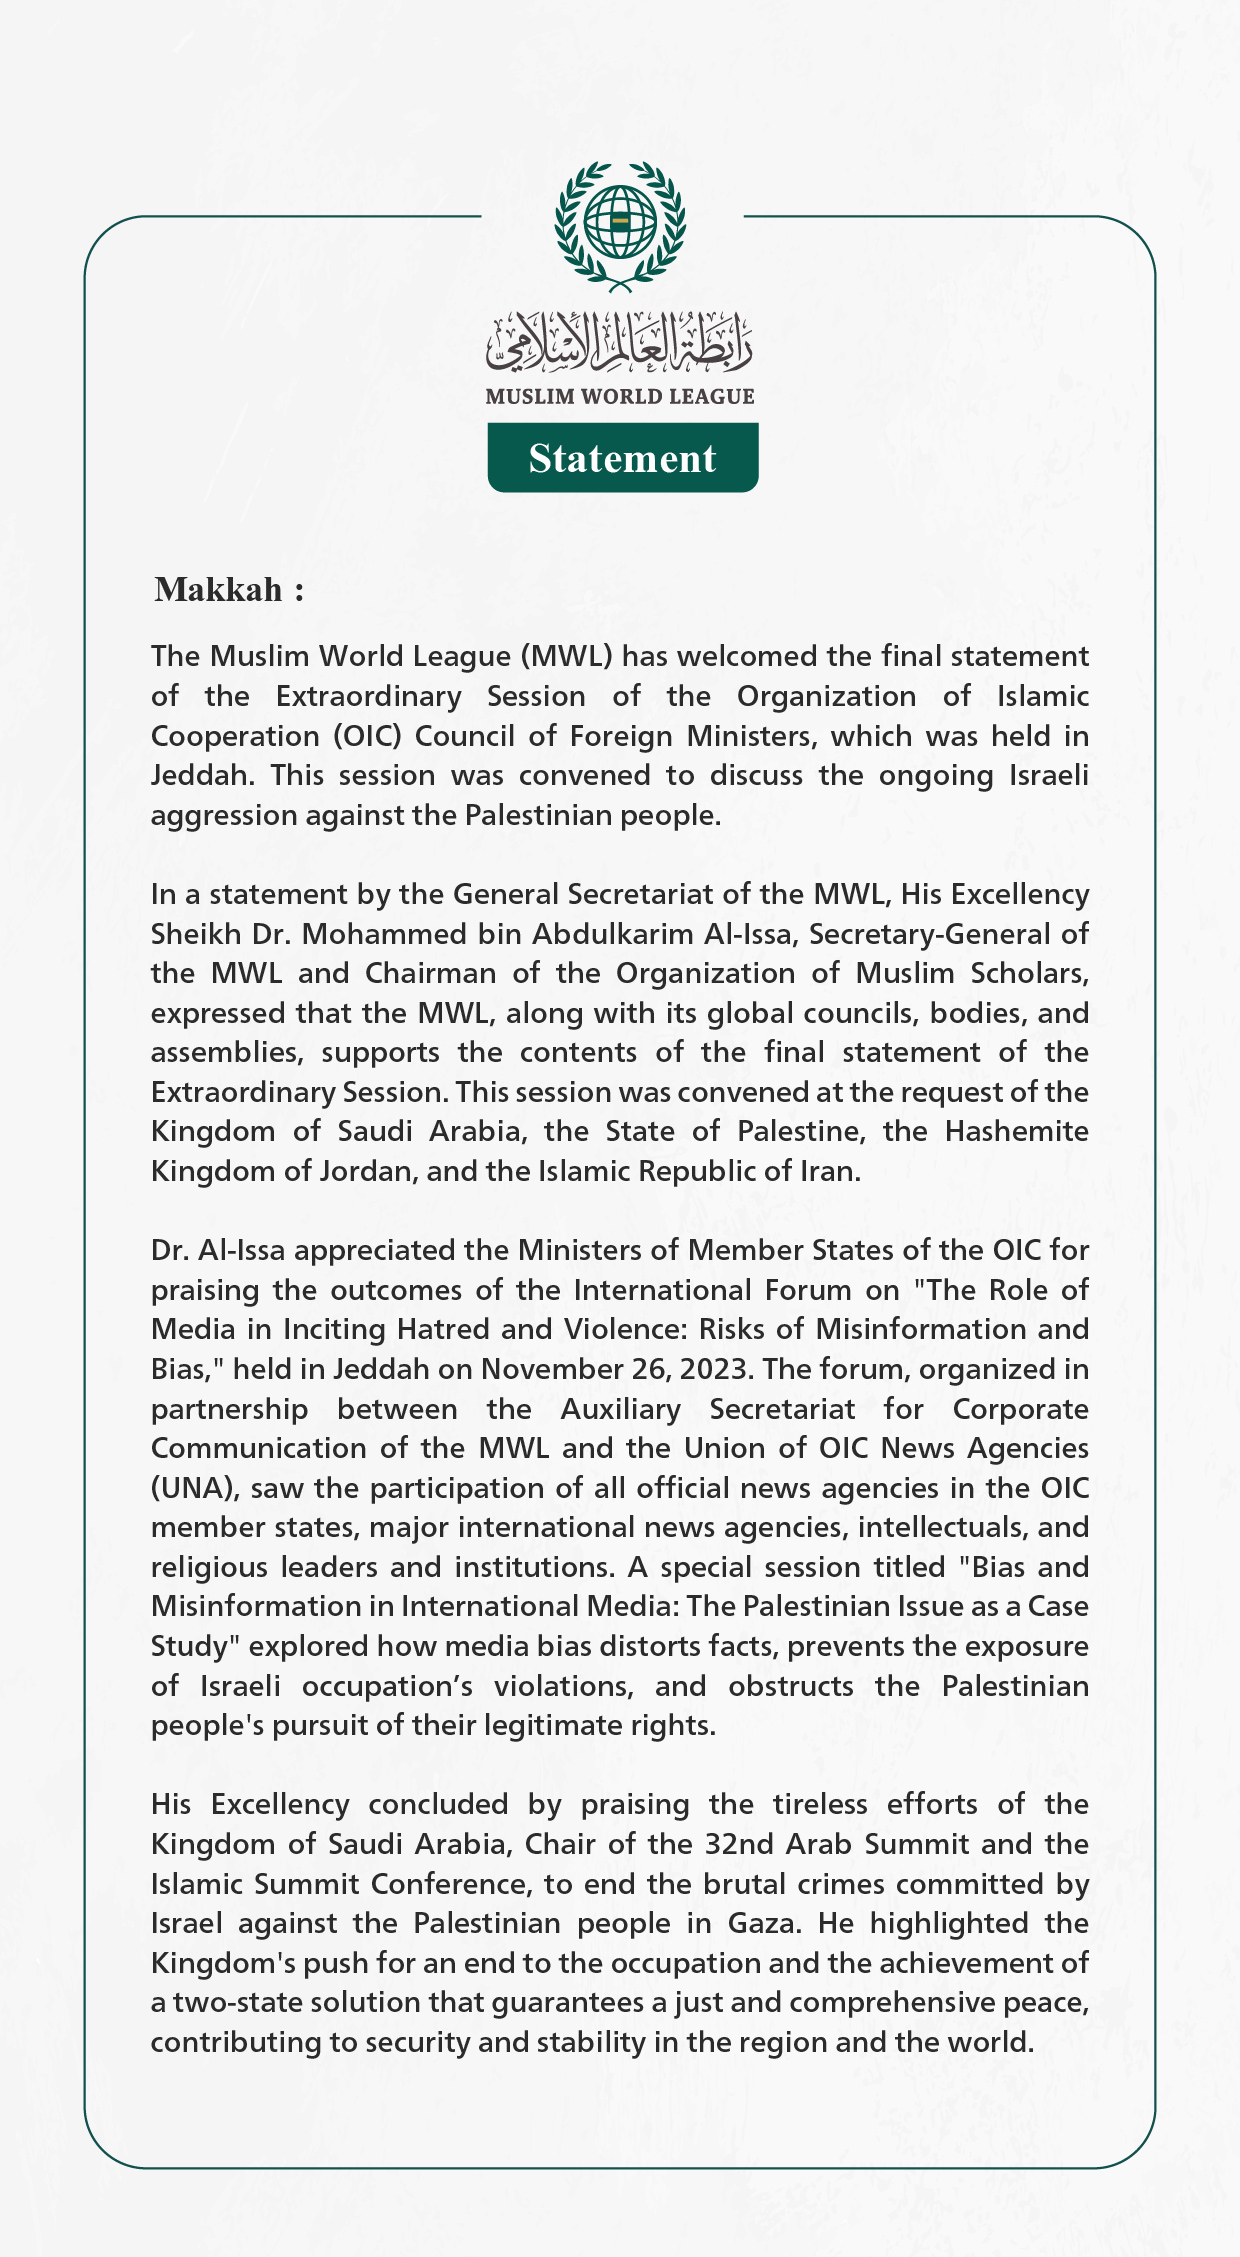 The Muslim World League Welcomes the Outcomes of the Extraordinary Session of the Organization of Islamic Cooperation Council of Foreign Ministers